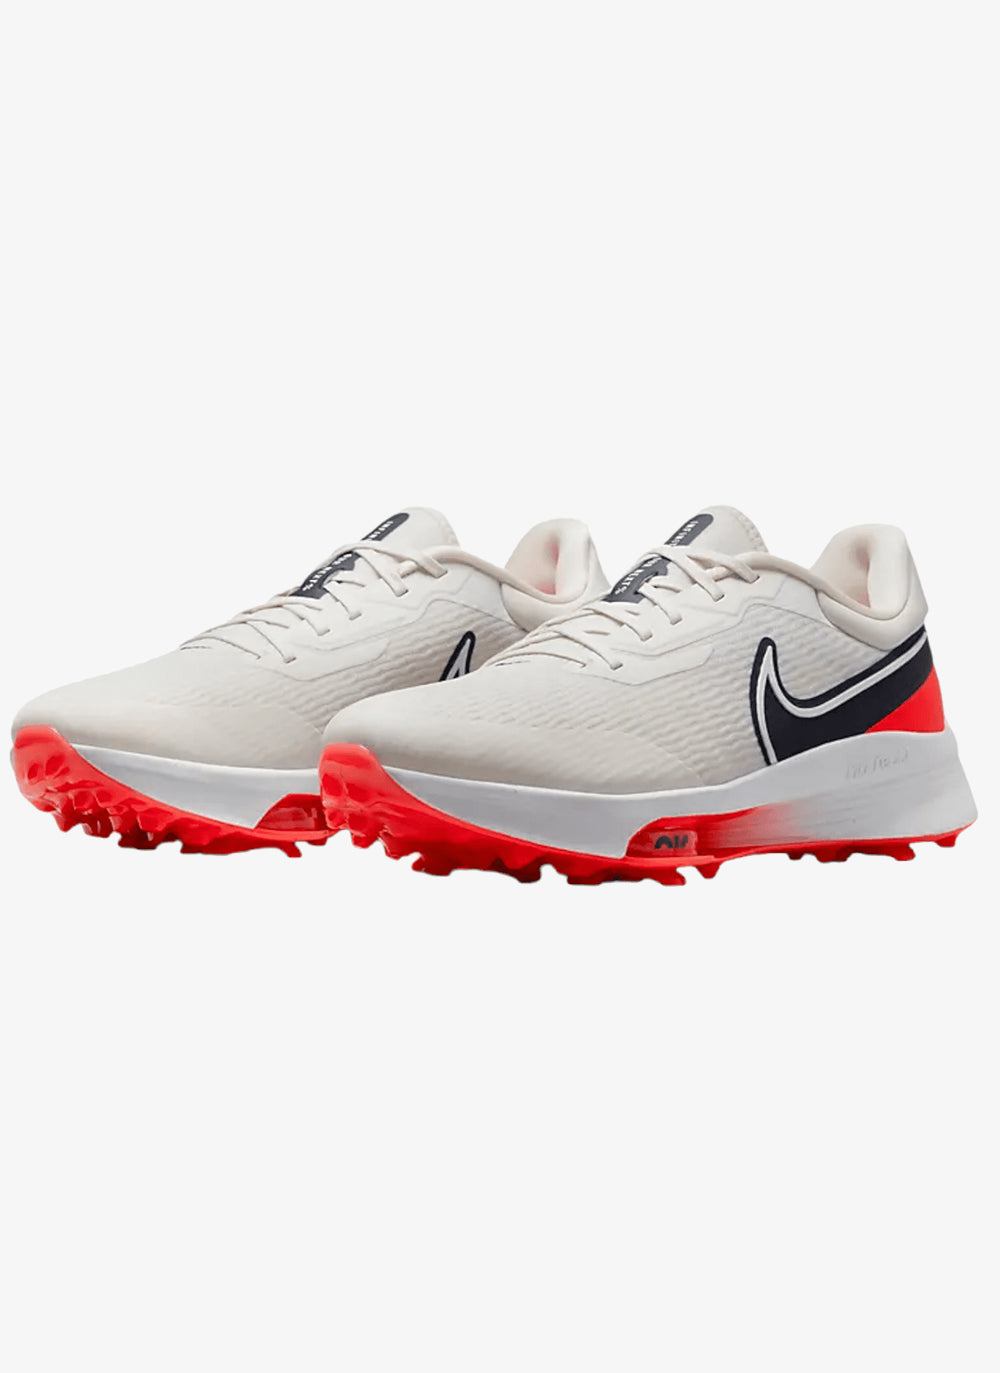 Nike Air Zoom Infinity Tour Next% Golf Shoes DC5221